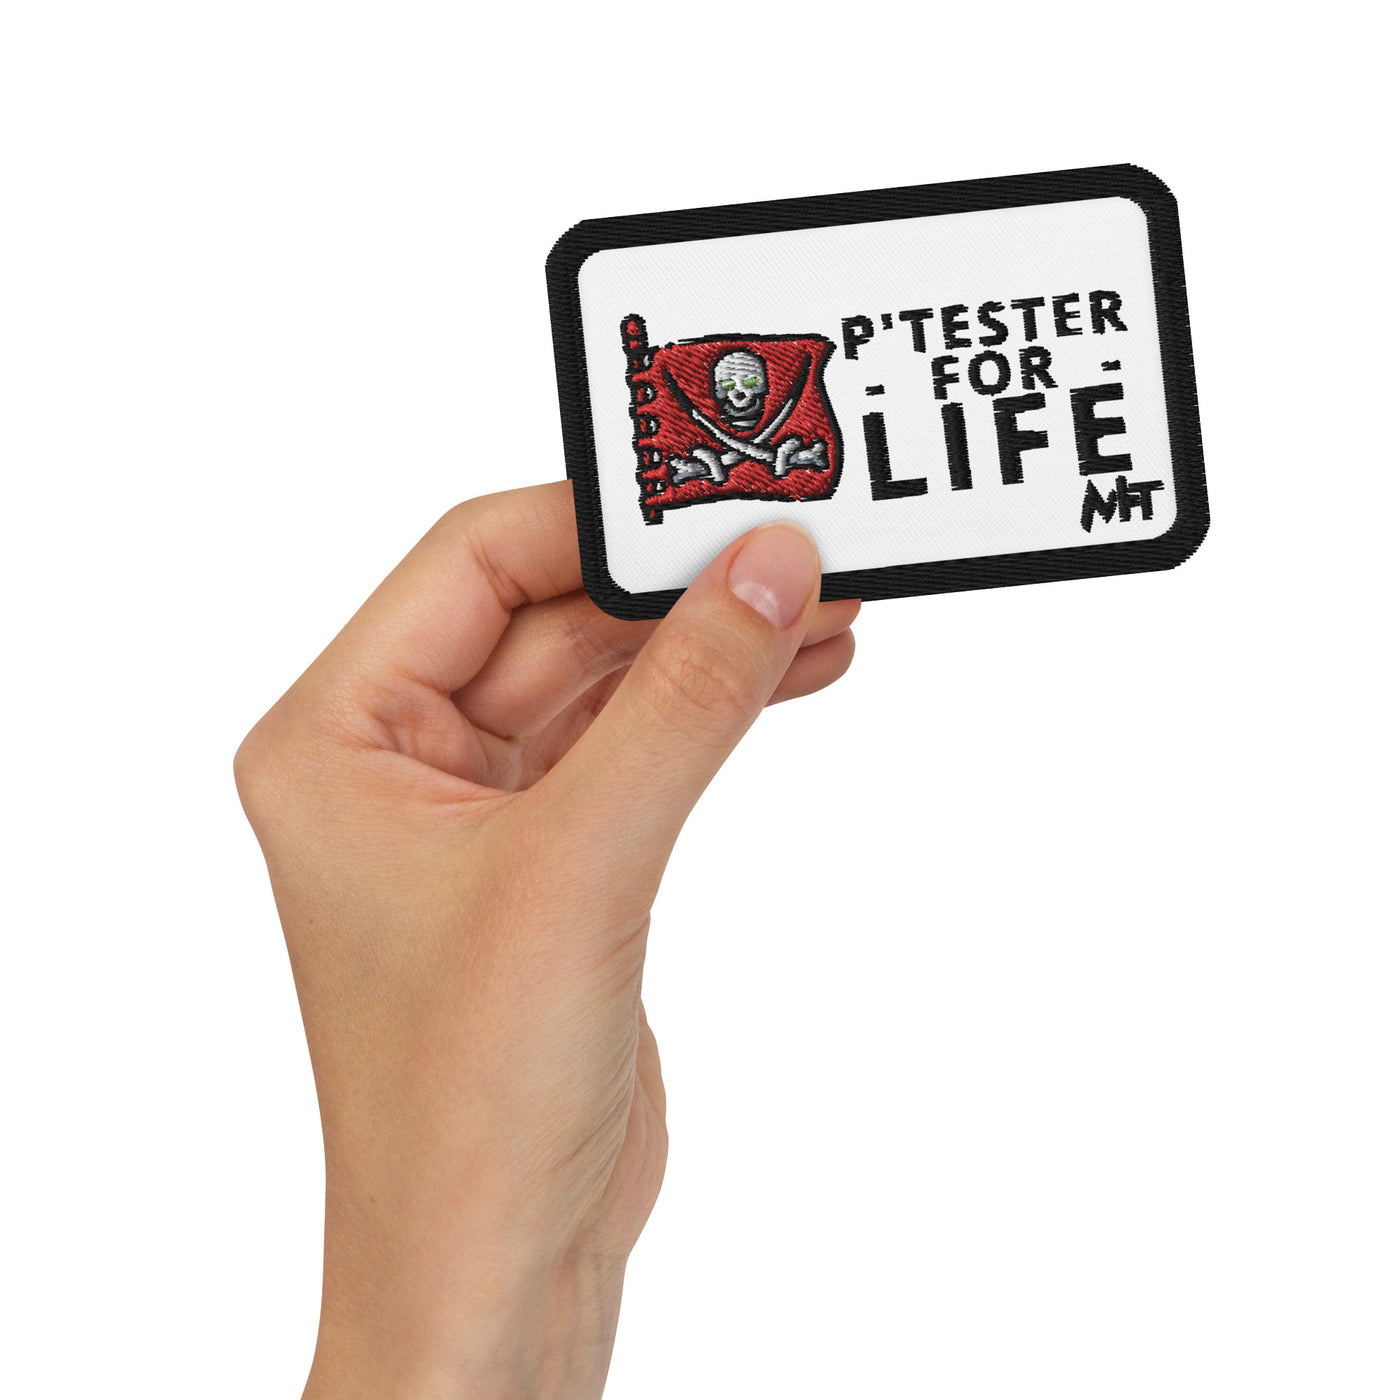 Pentester for life - Embroidered patches